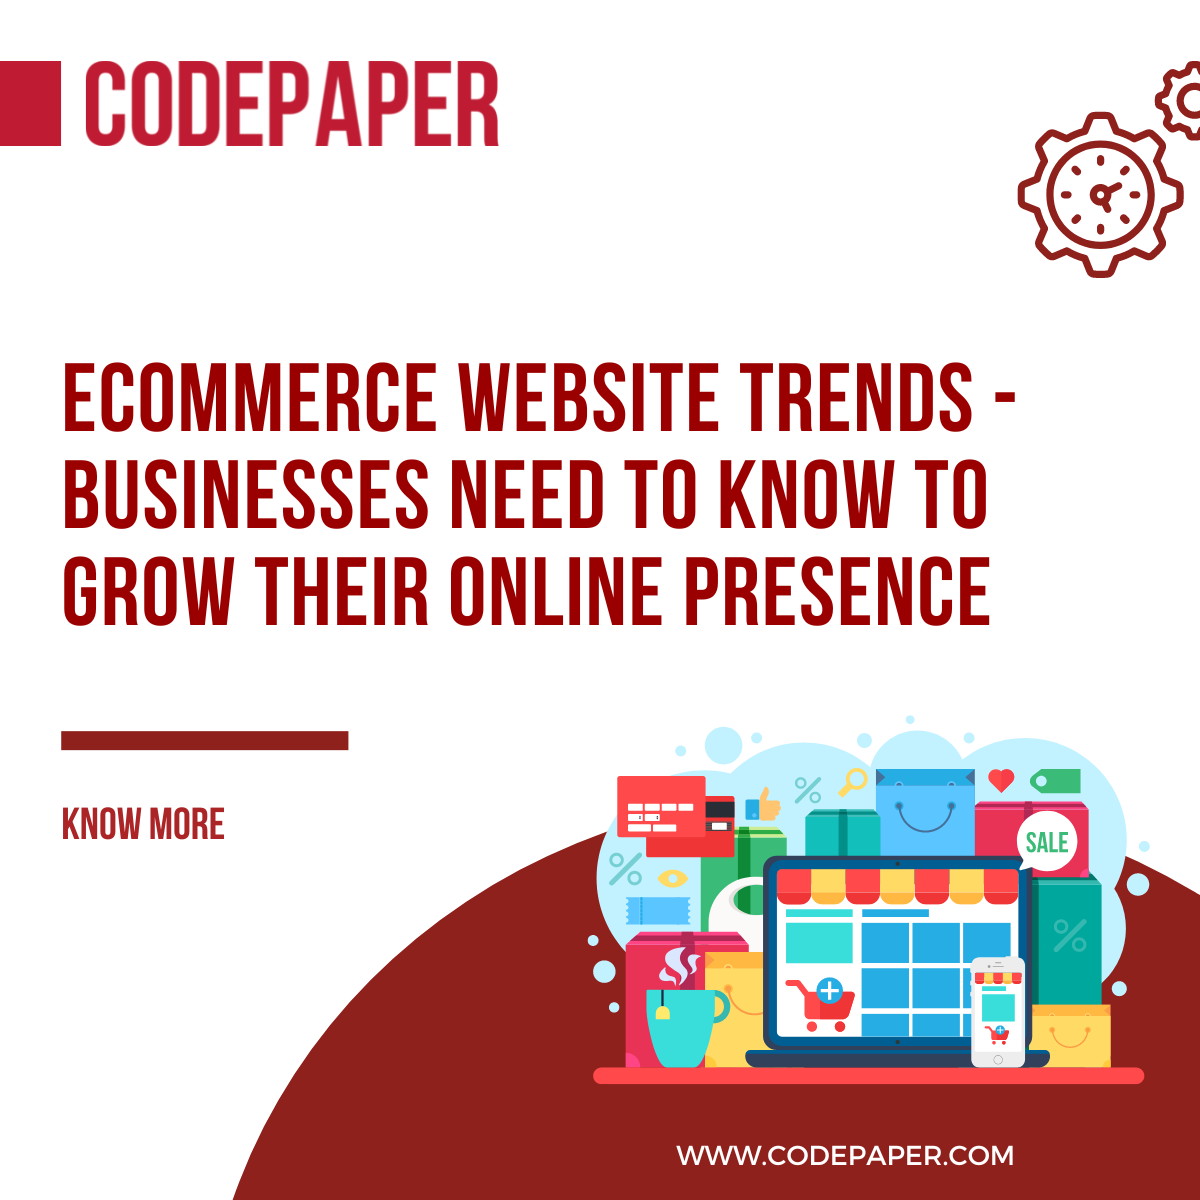 eCommerce Website Trends - Businesses Need To Know To Grow Their Online Presence